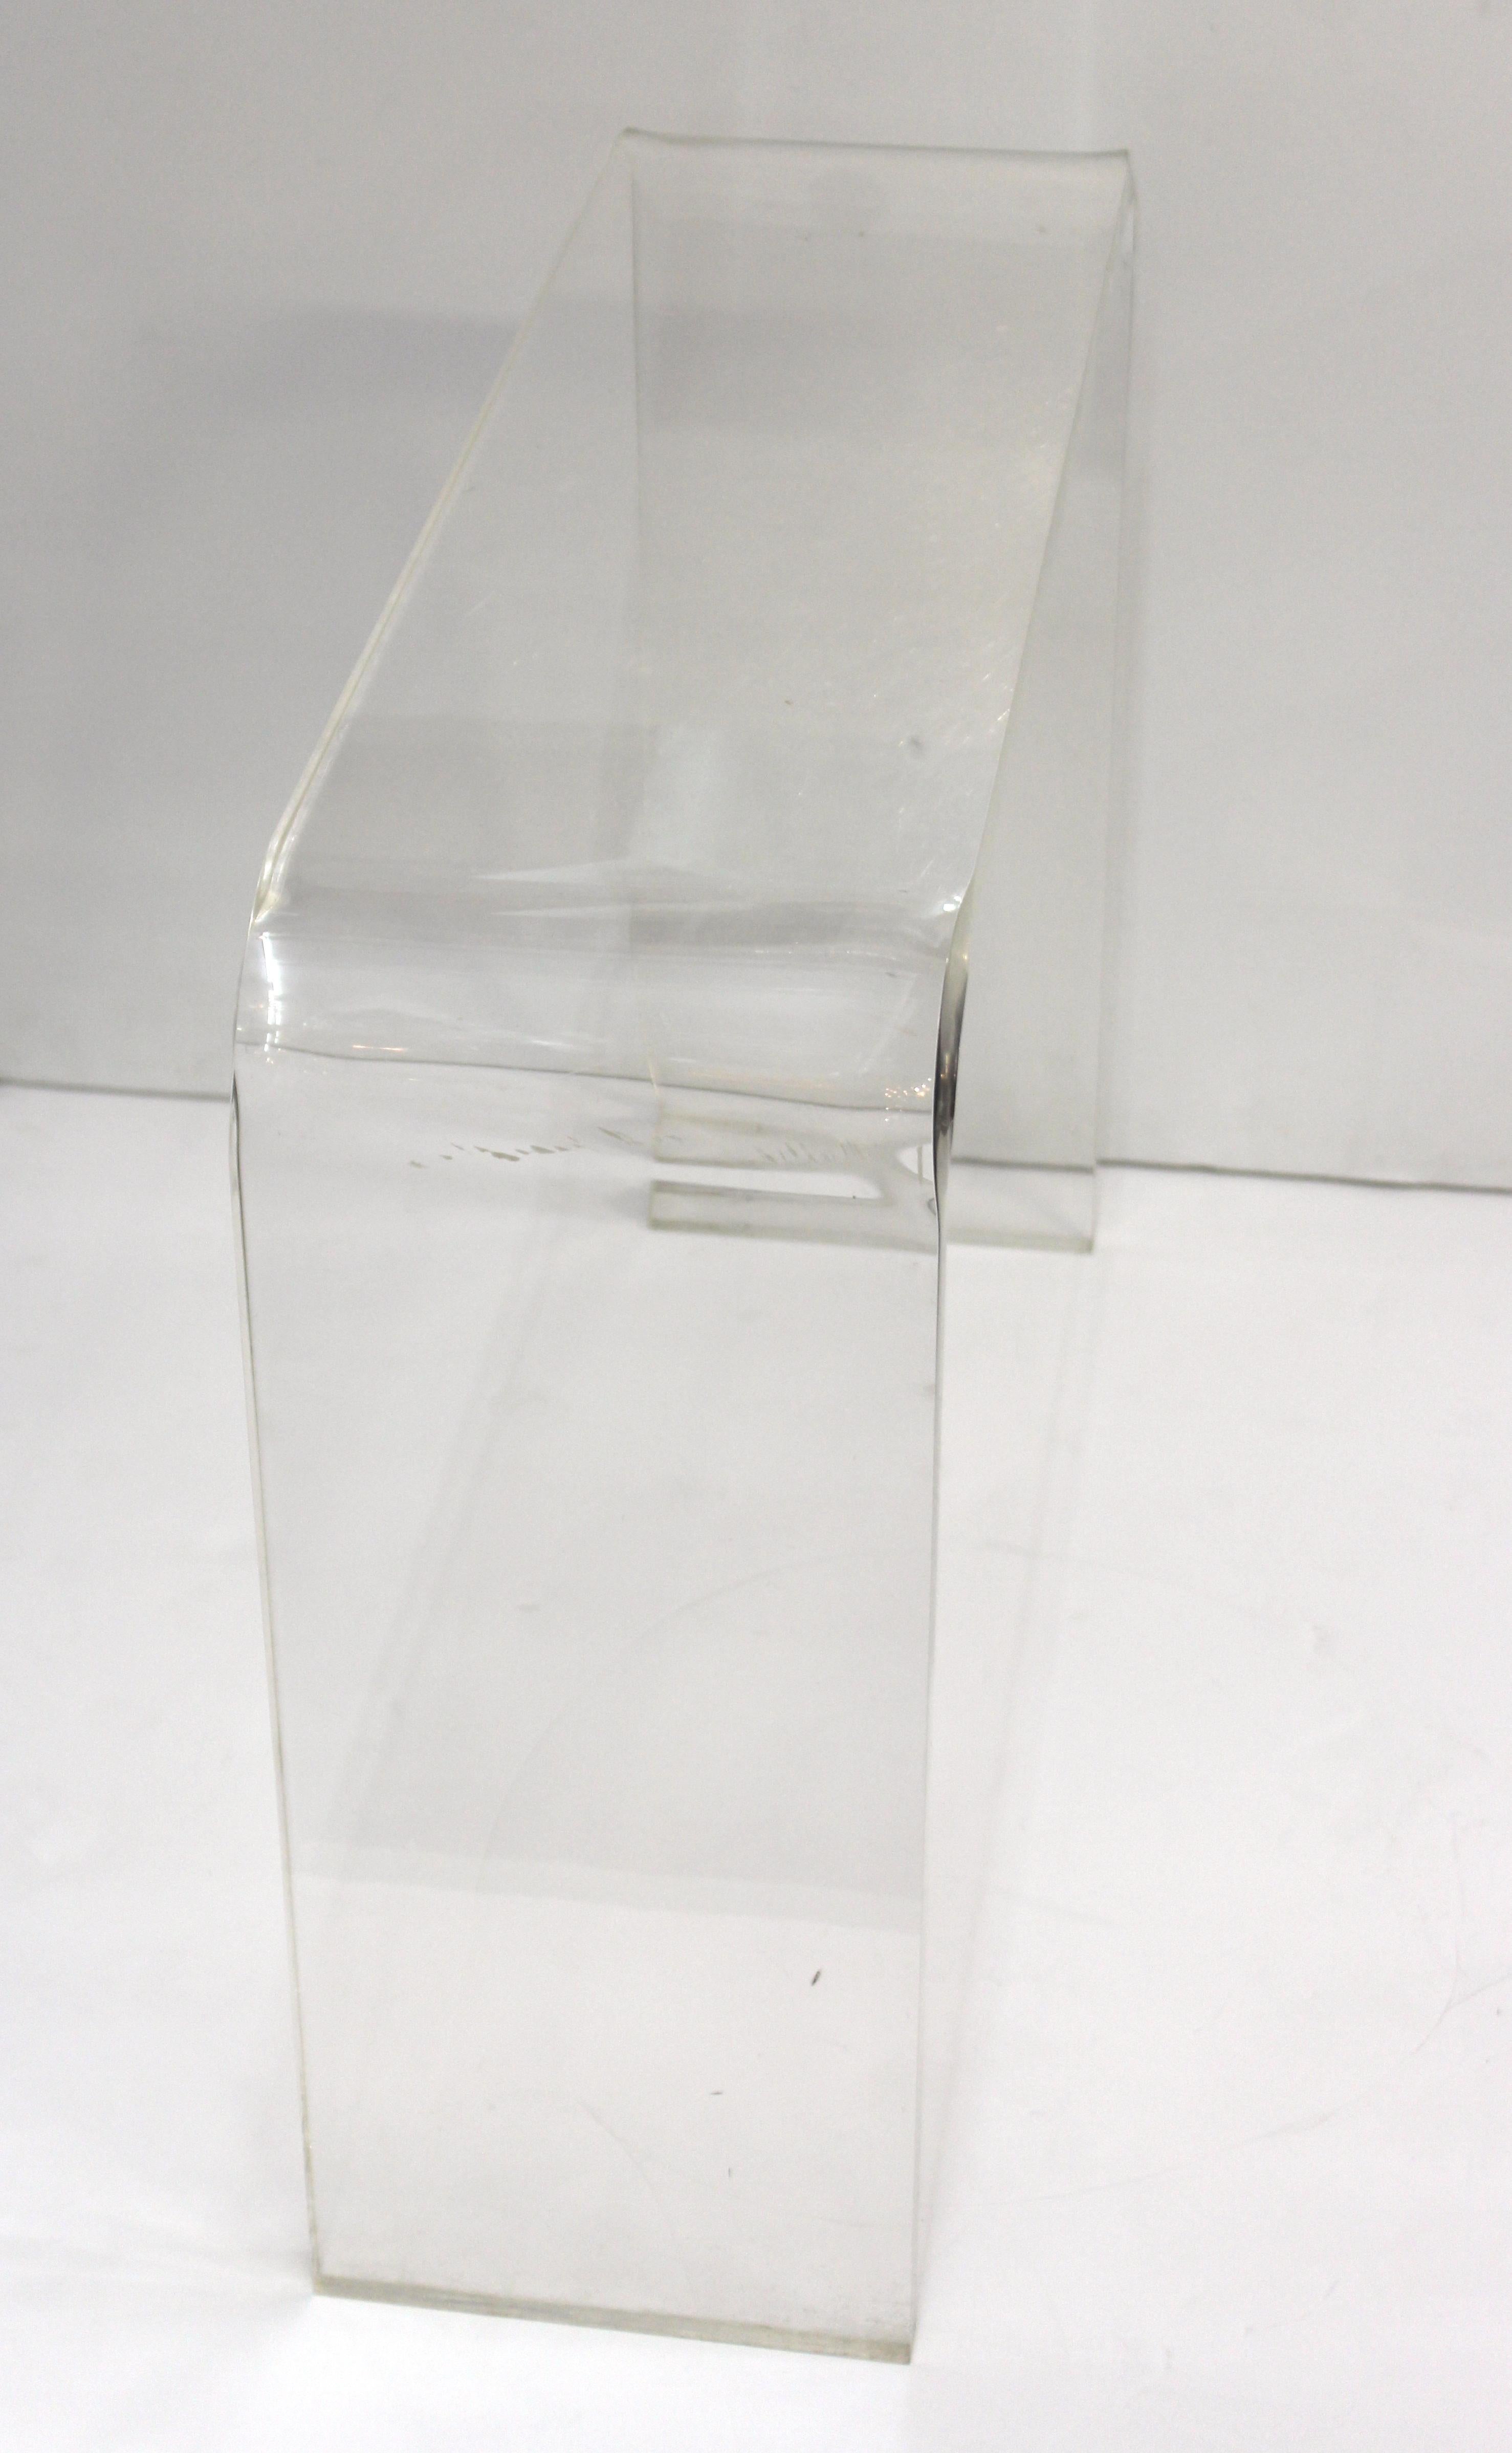 acrylic waterfall console table